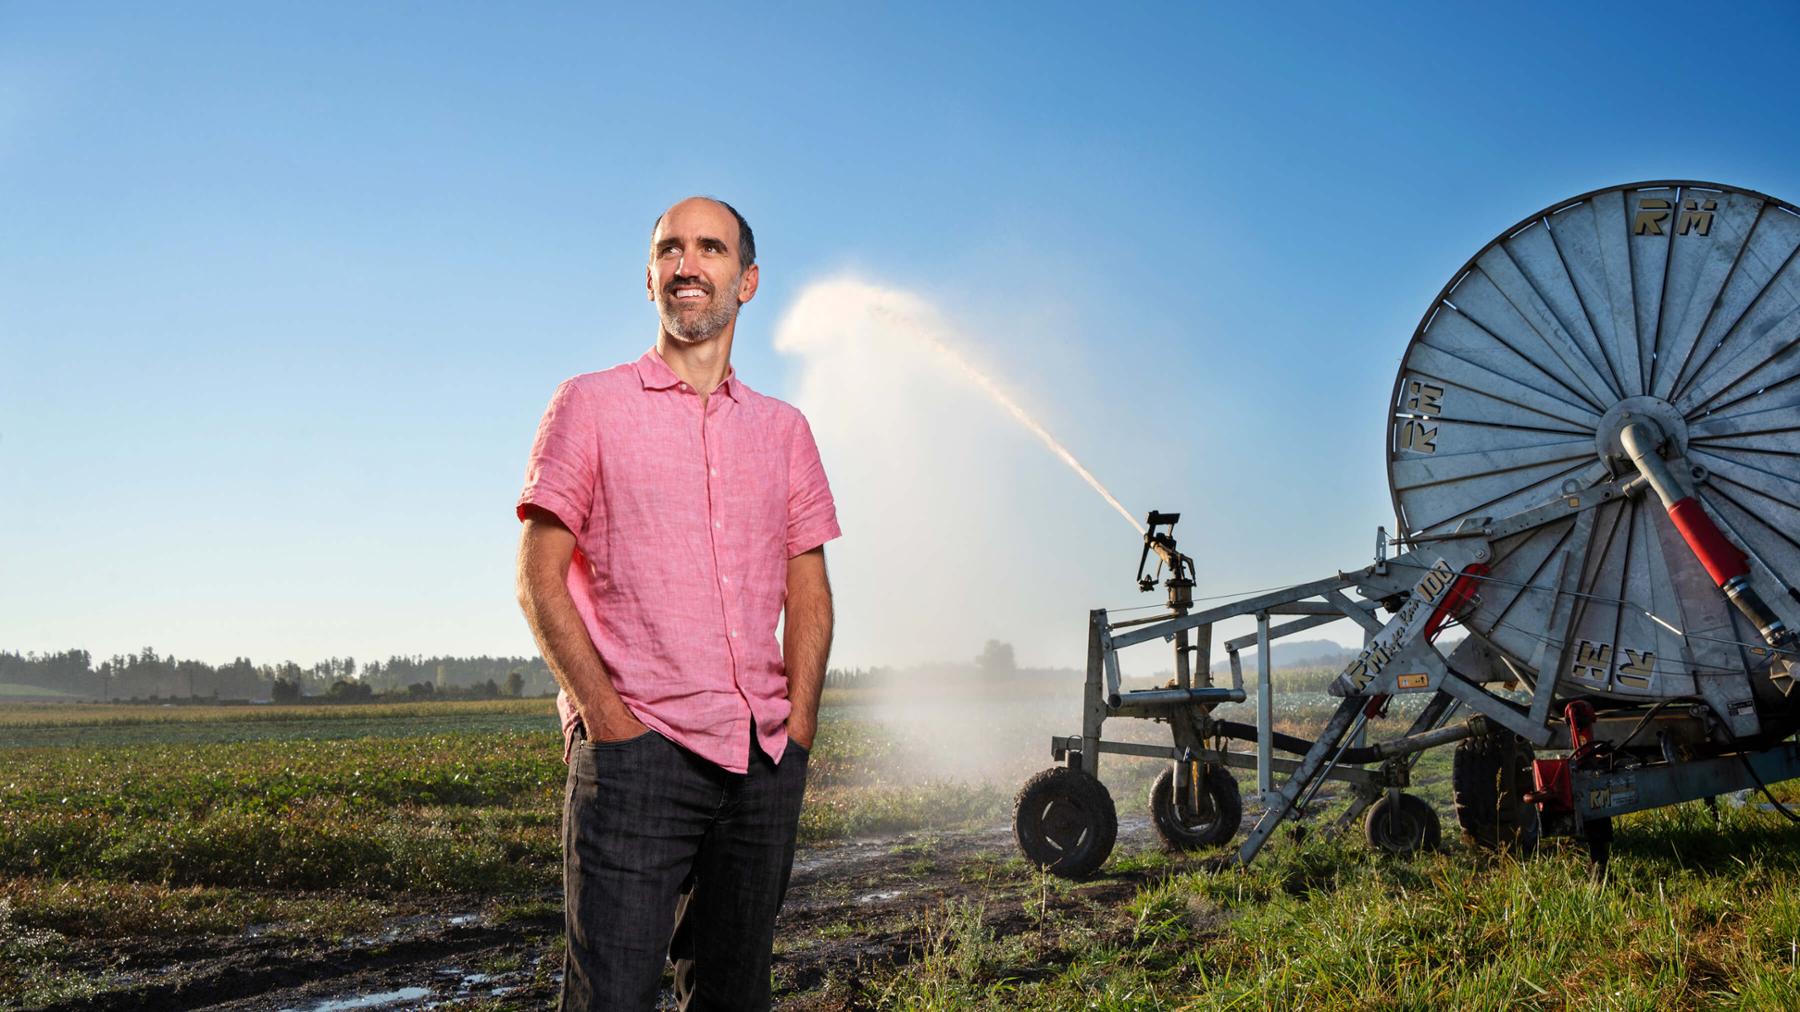 UVic Civil Engineering researcher Tom Gleeson stands in a farm field netx to irrigation equiptment